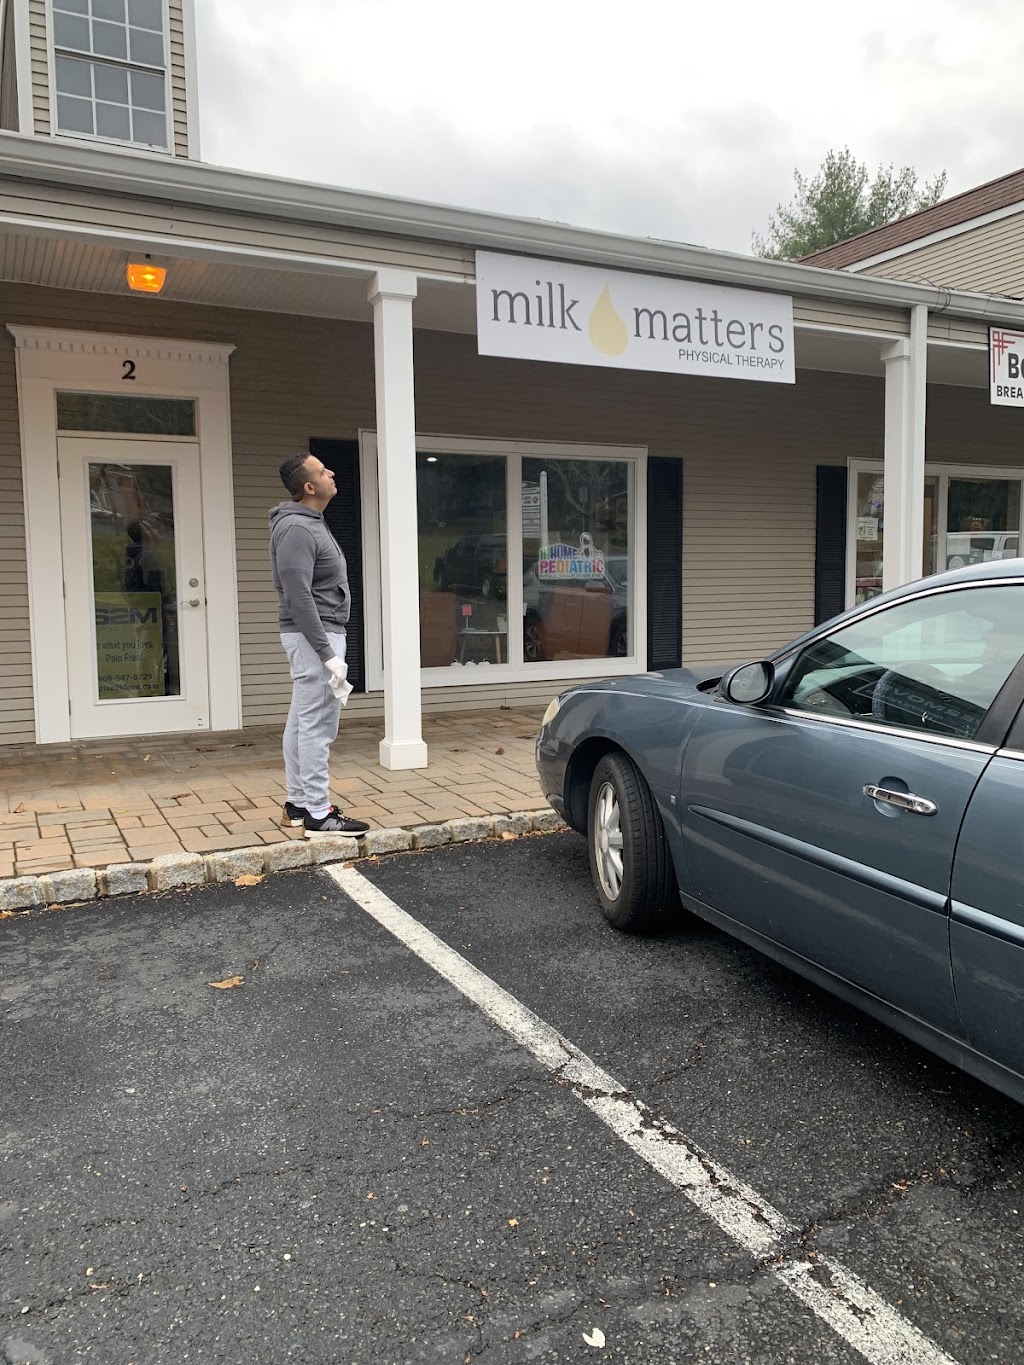 Milk Matters Physical Therapy | 1910 Washington Valley Rd, Martinsville, NJ 08836 | Phone: (201) 401-0702